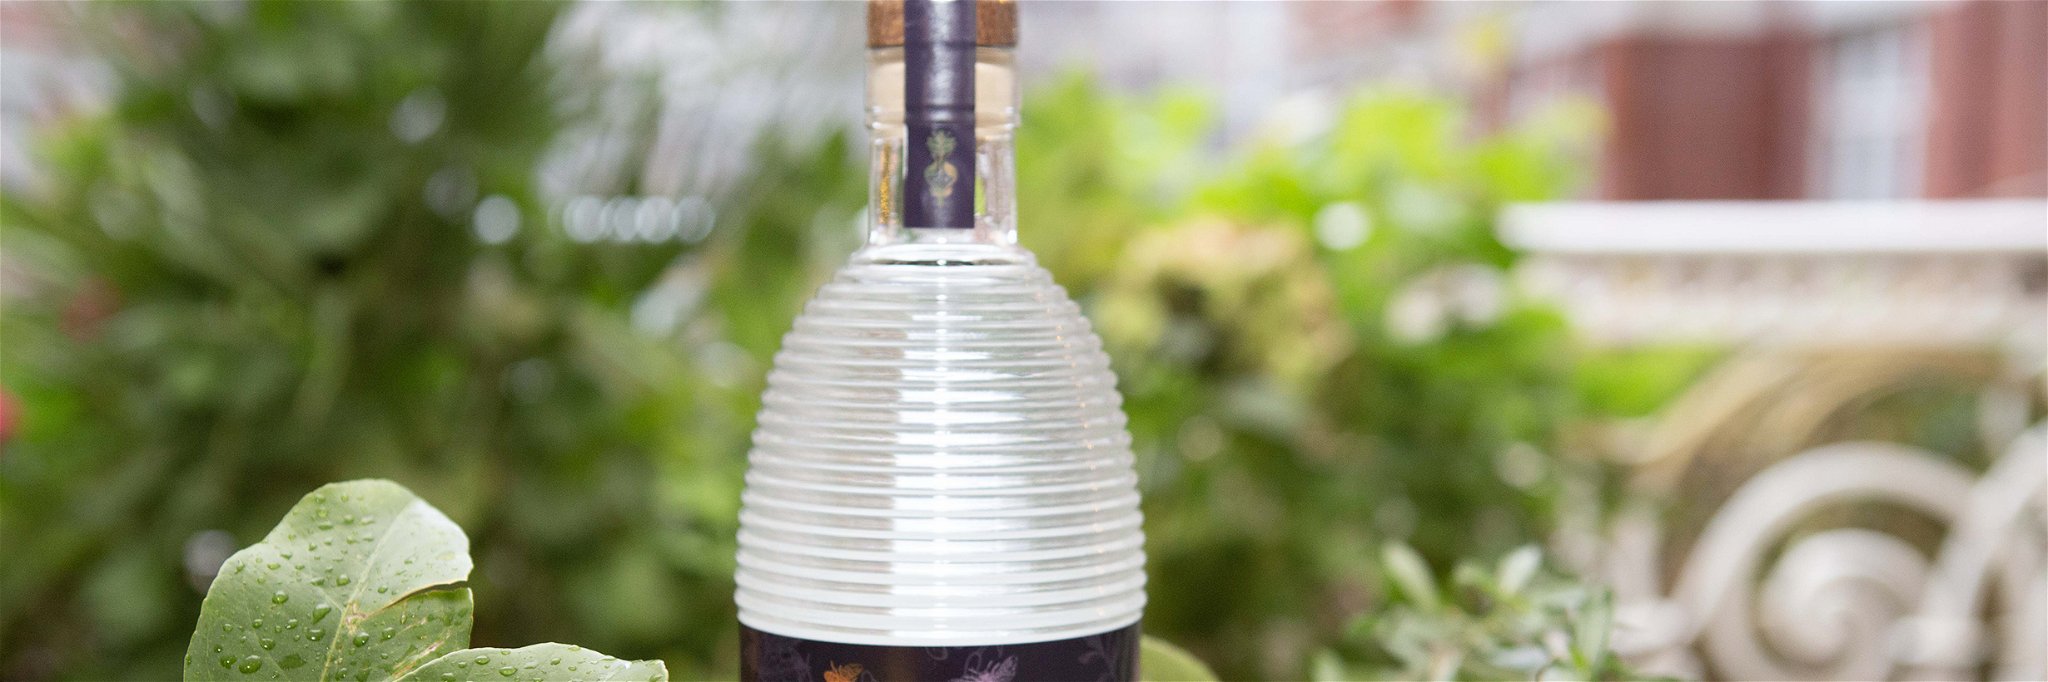 The London Dry infused gin is made by the Hawkridge Distillers.